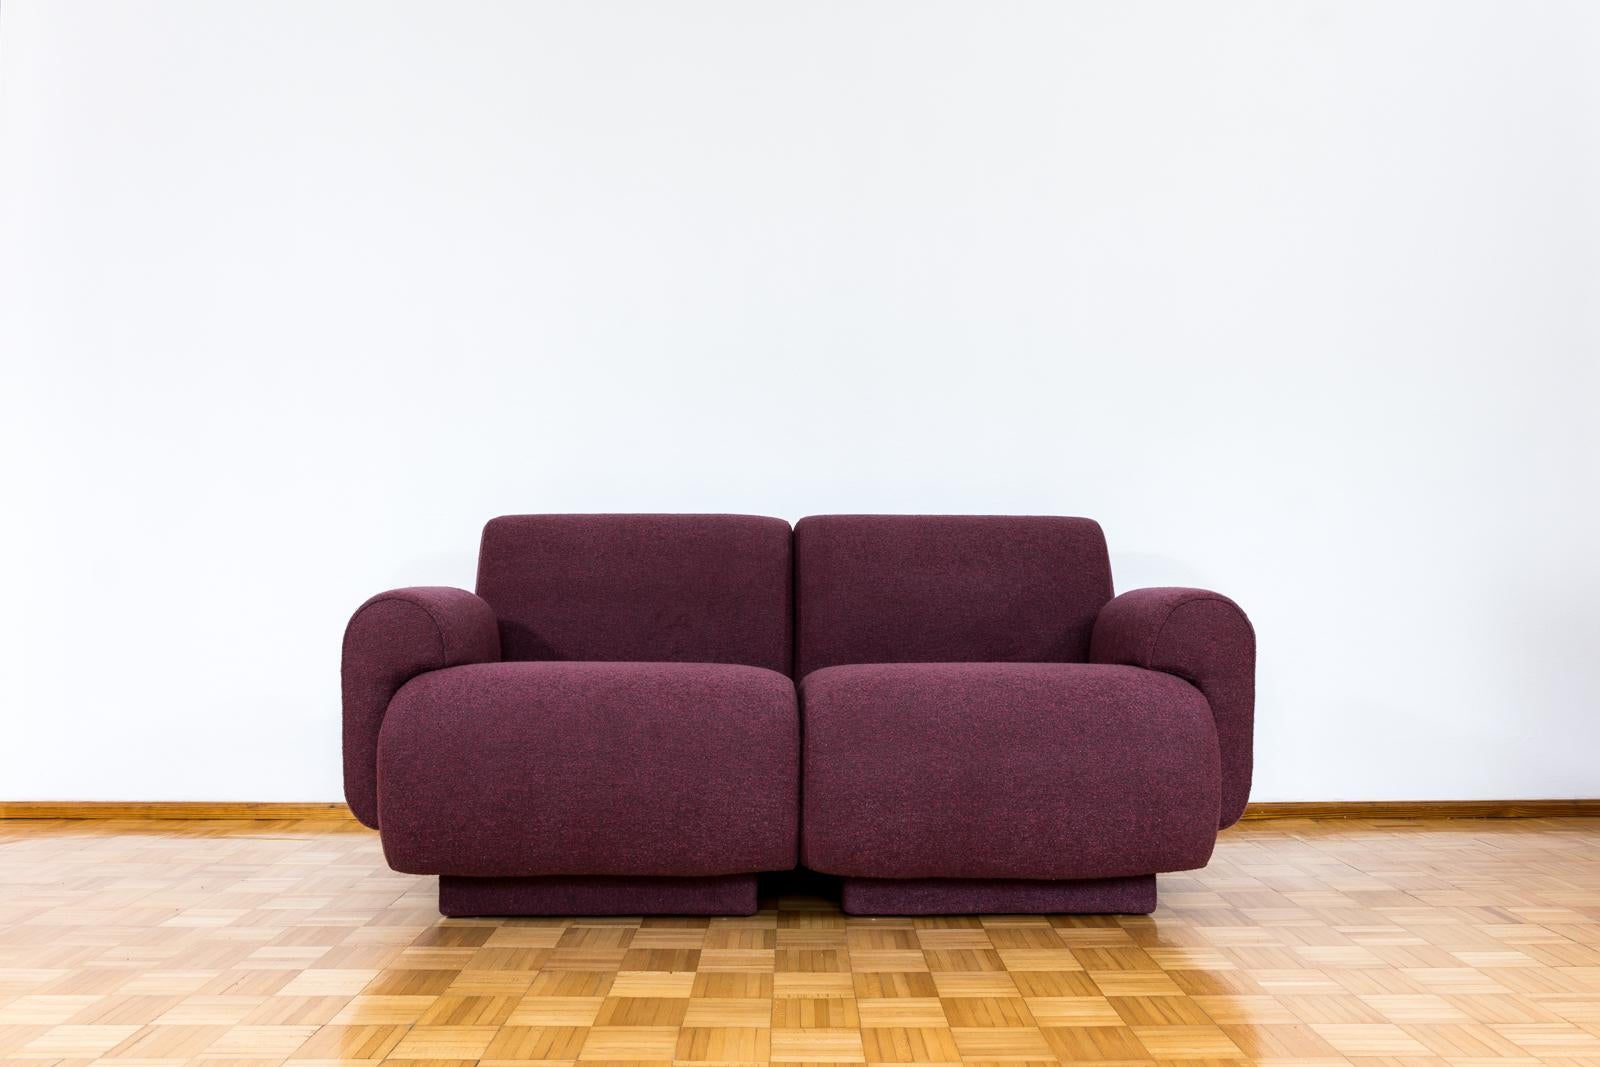 Pair Of Purple Modular Lounge Chairs, 1970, Germany For Sale 4